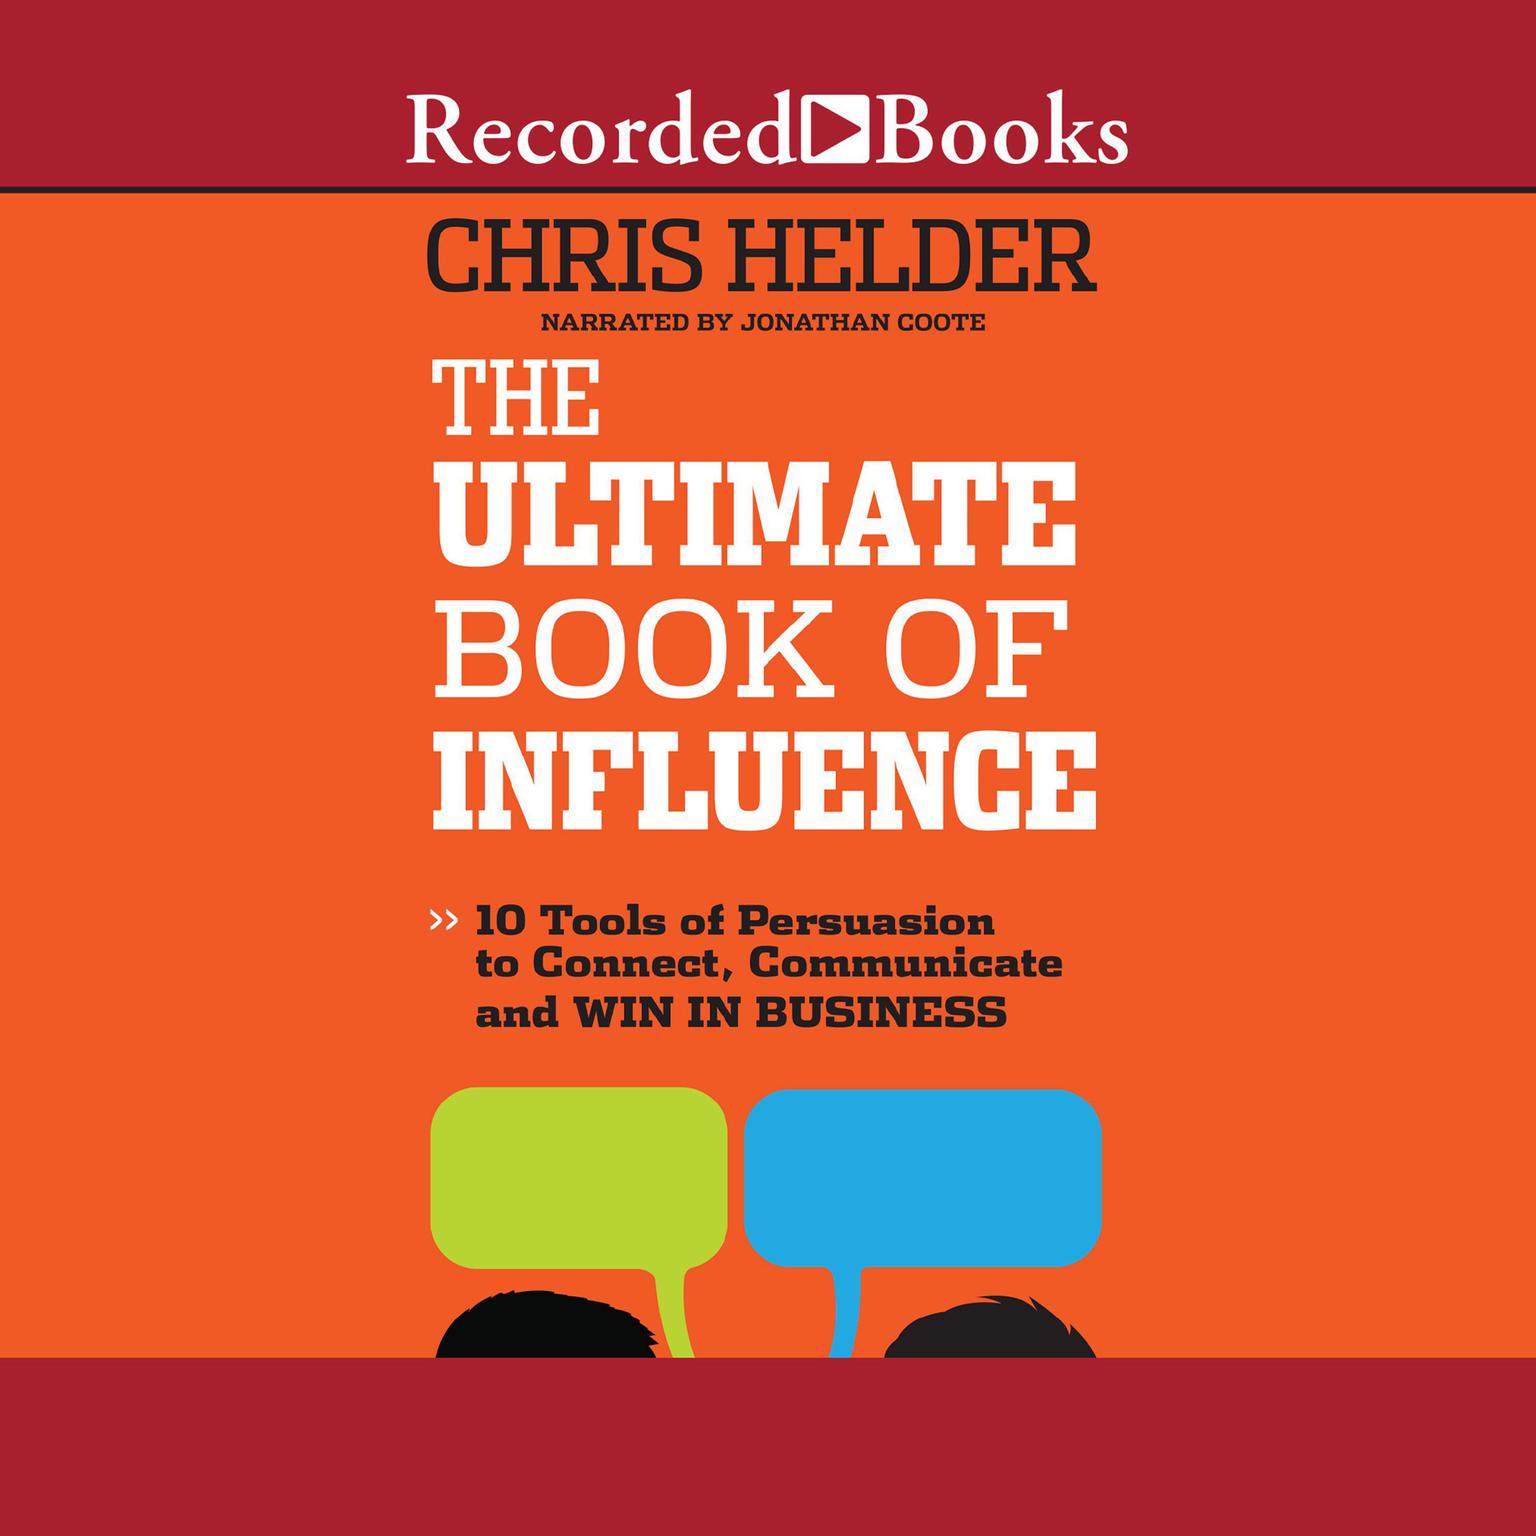 The Ultimate Book of Influence: 10 Tools of Persuasion to Connect, Communicate, and Win in Business Audiobook, by Chris Helder